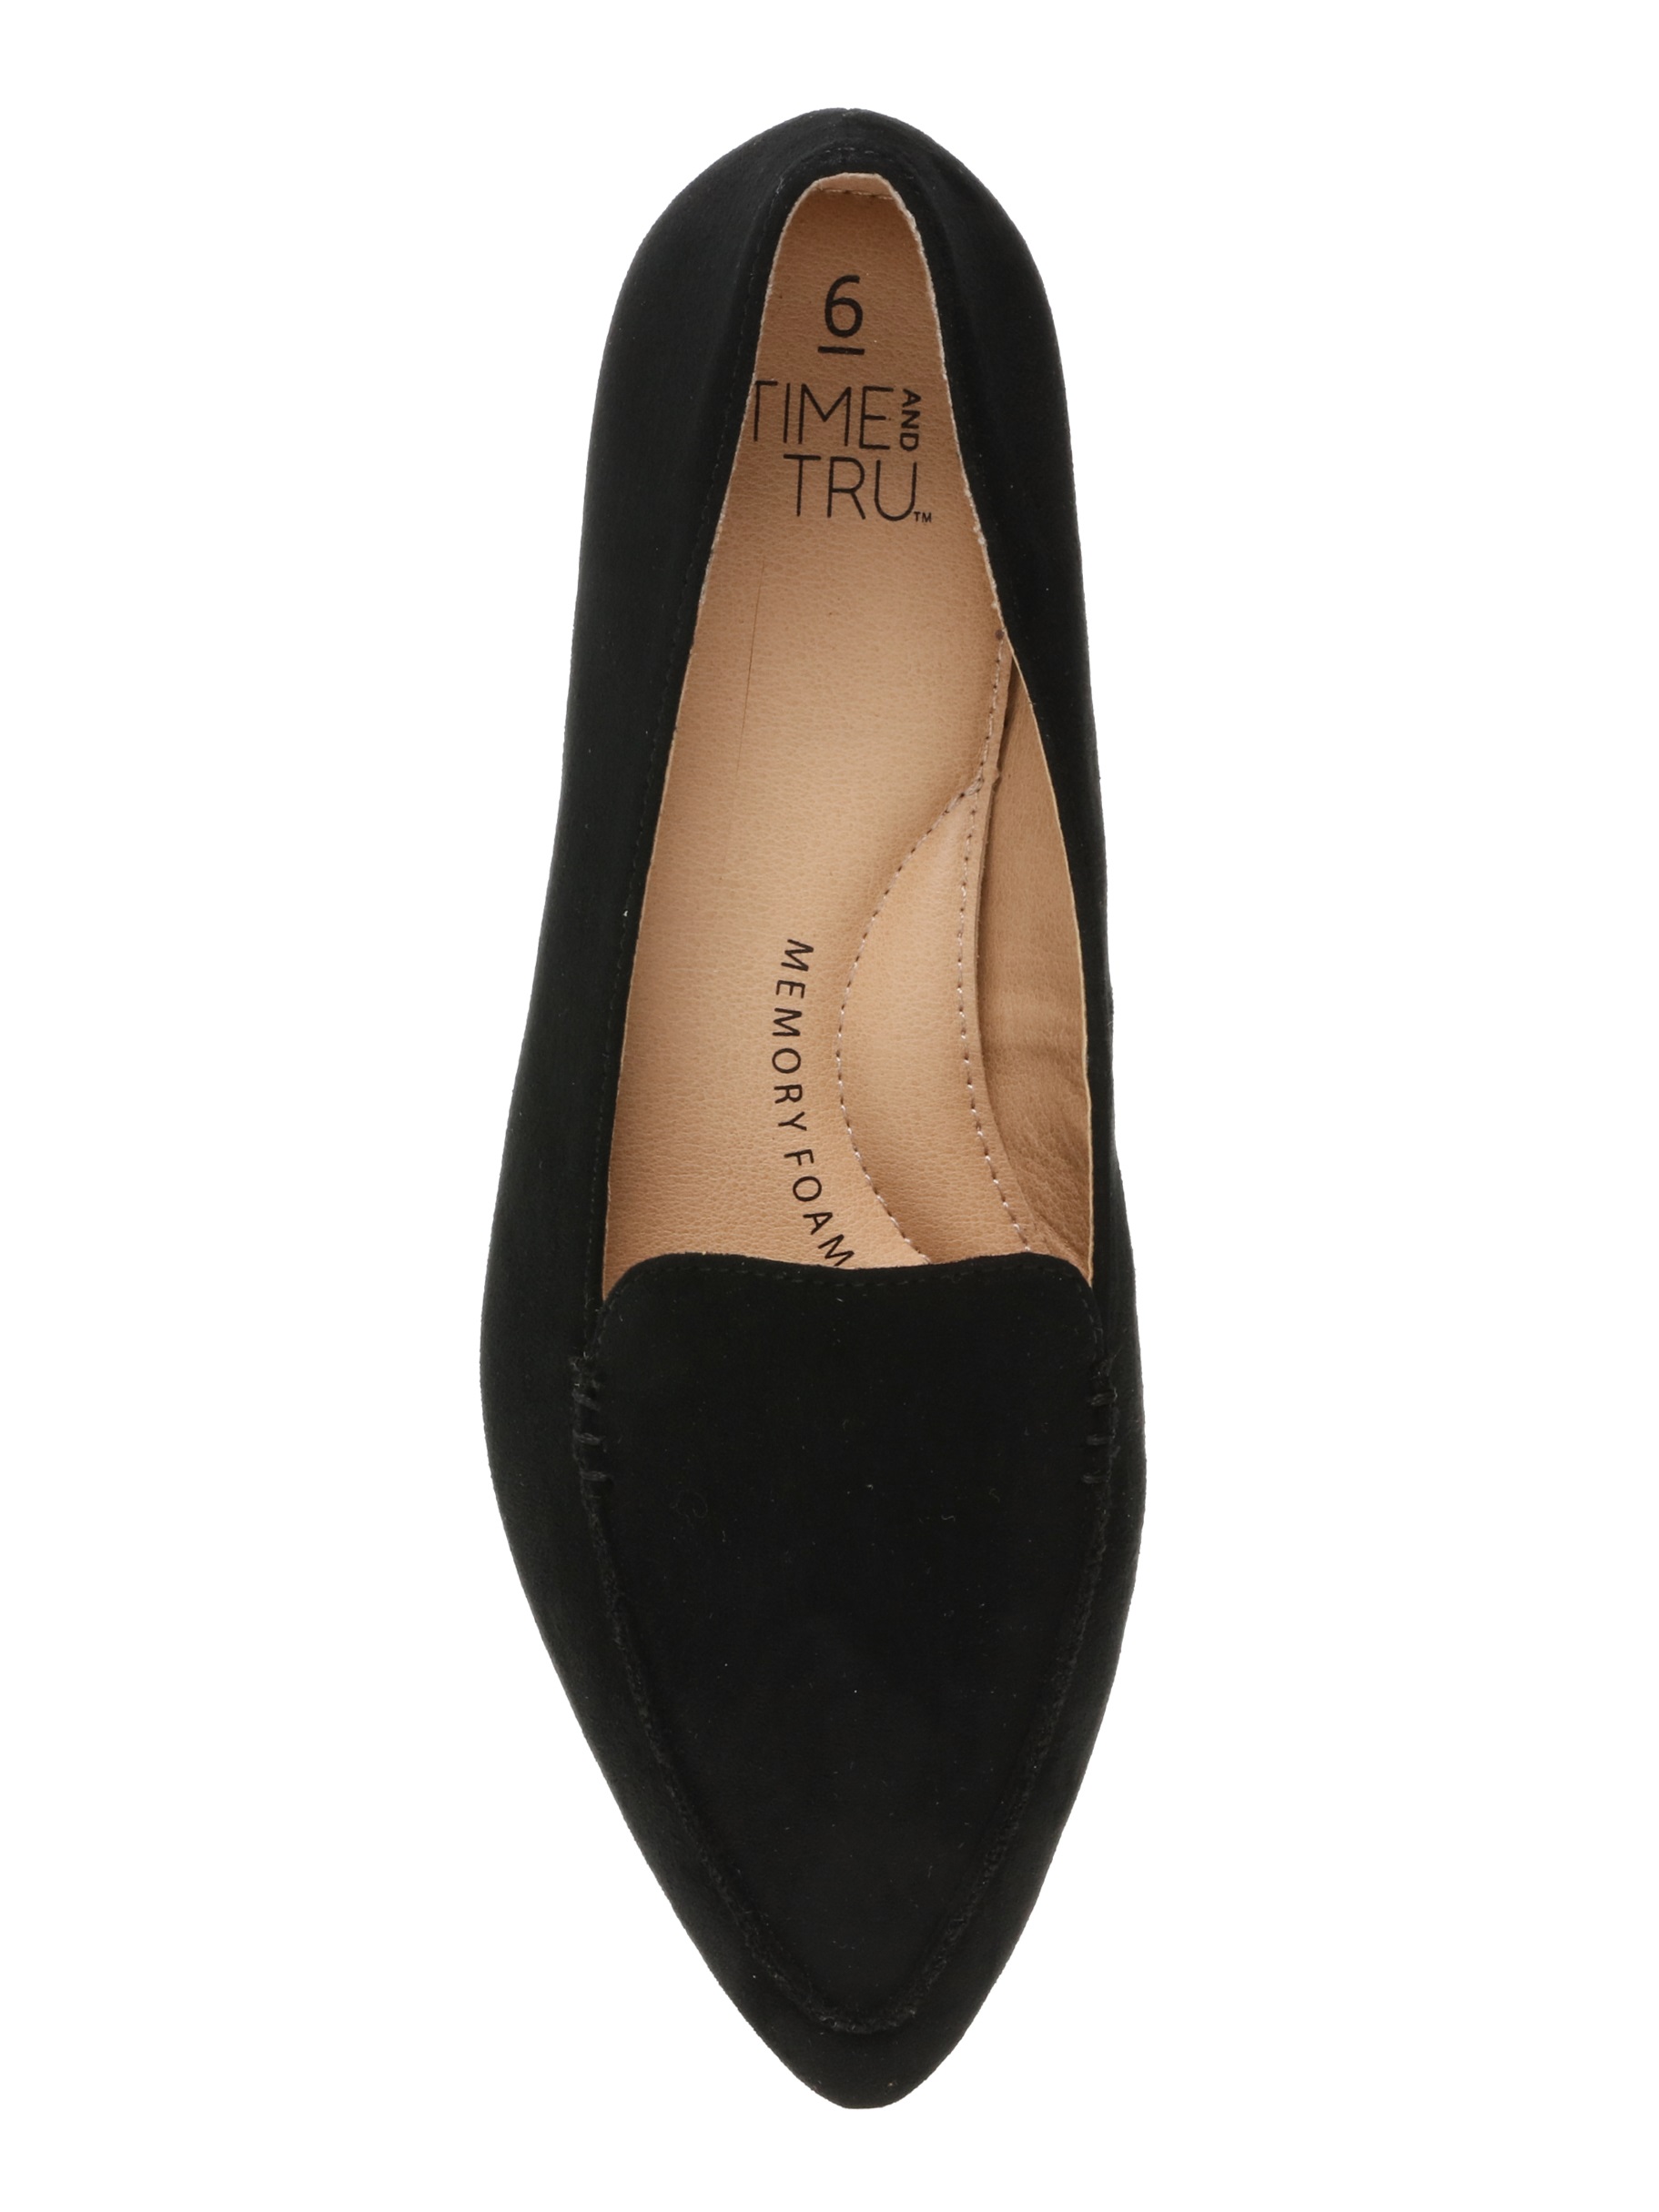 Time and Tru Women's Feather Flat, Wide Width Available - image 4 of 6